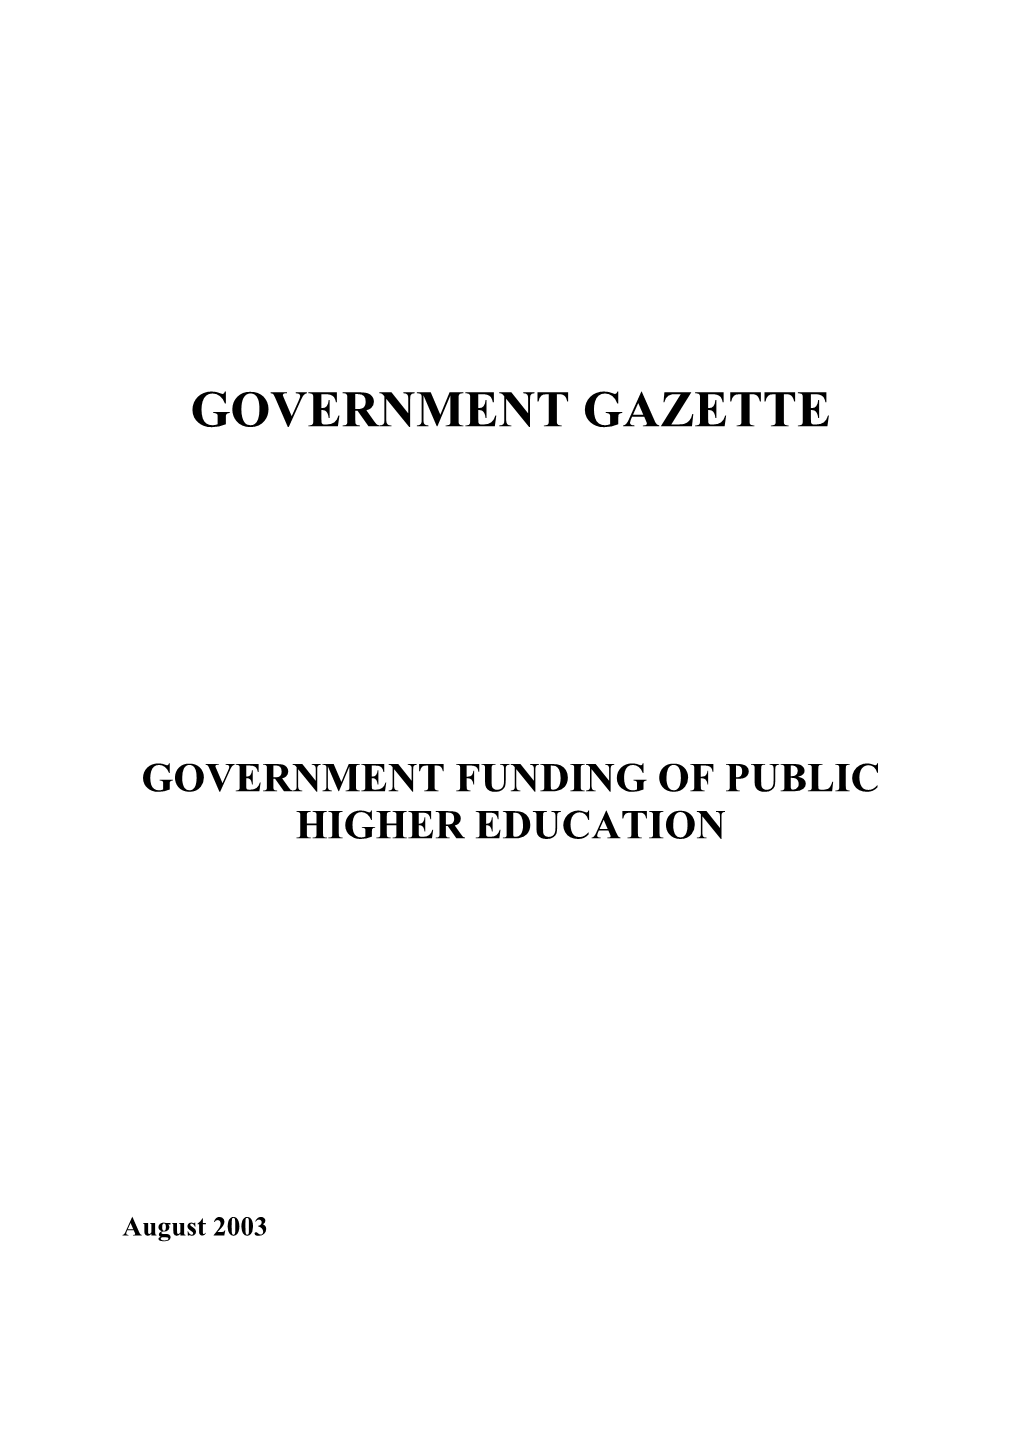 1 Funding of Public Higher Education in South Africa